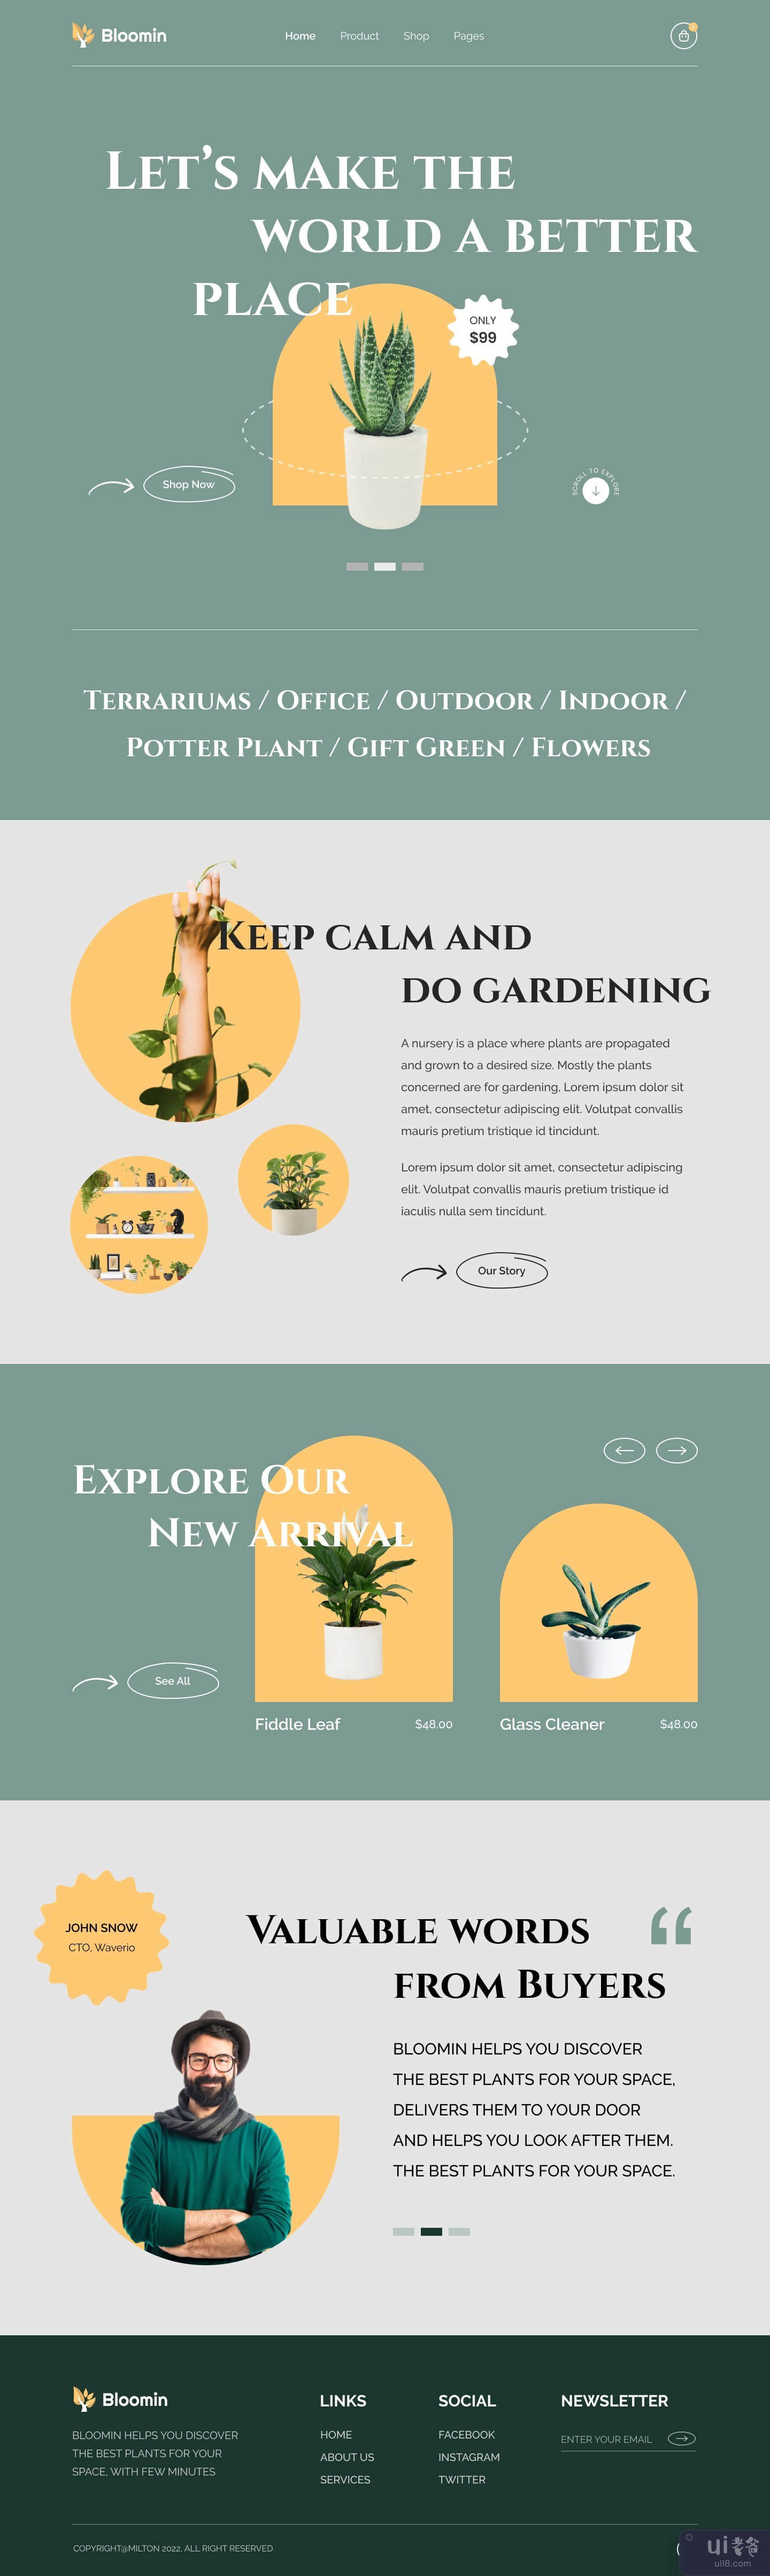 Bloomin-植物商店登陆页面(Bloomin - Plant Shop Landing Page)插图2